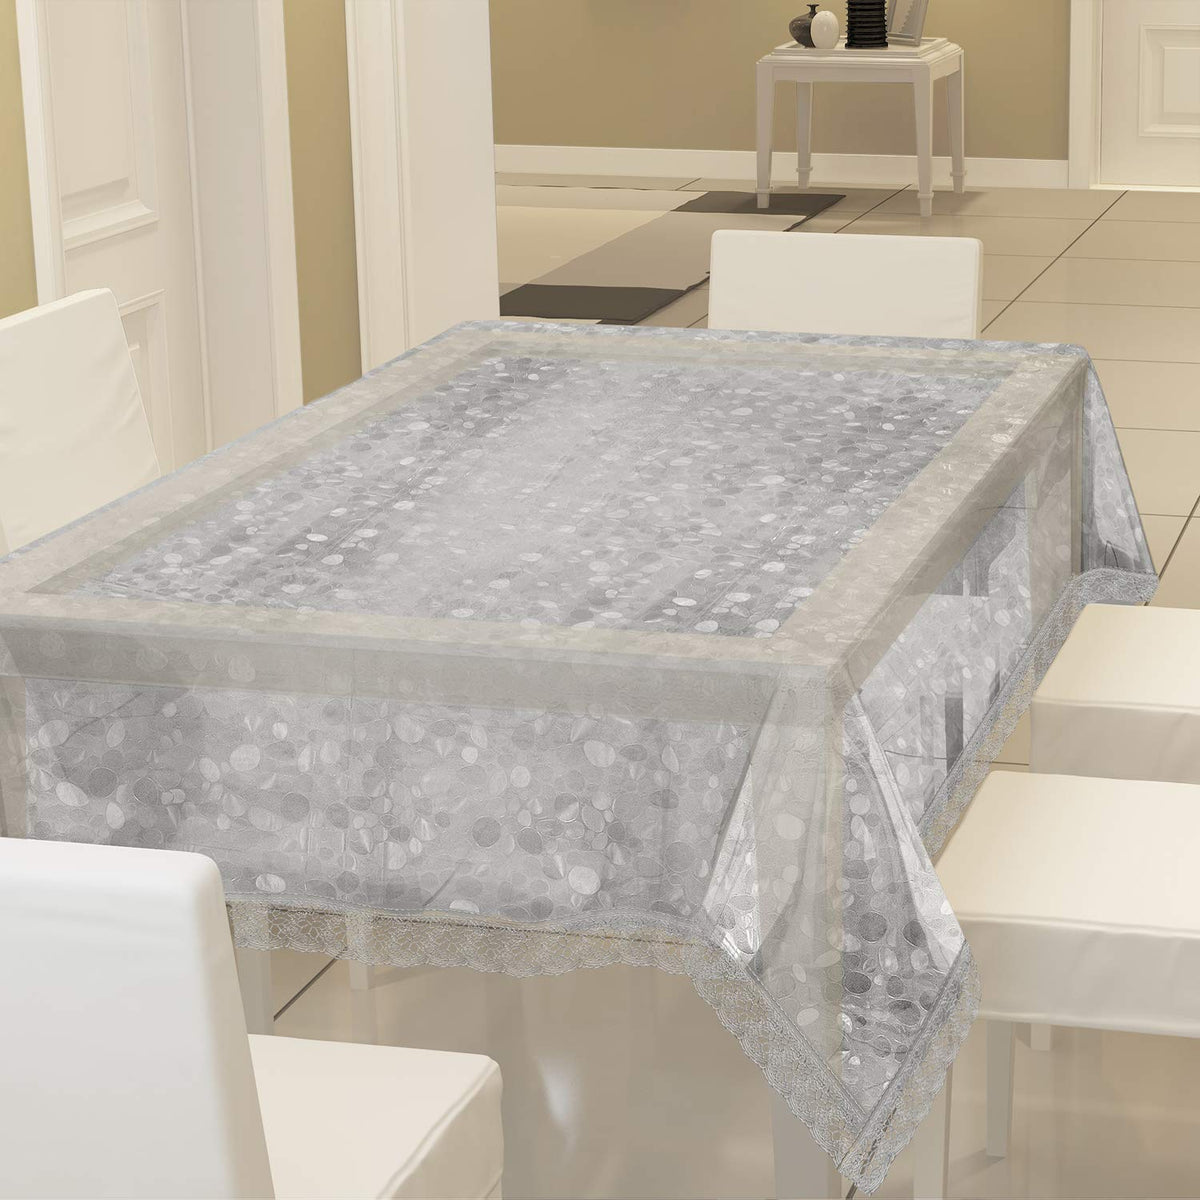 Kuber Industries Dining Table Cover 6 Seater|Table Cloth|Table Cover for Home, Restaurant|Transparent 3D Design (Silver)